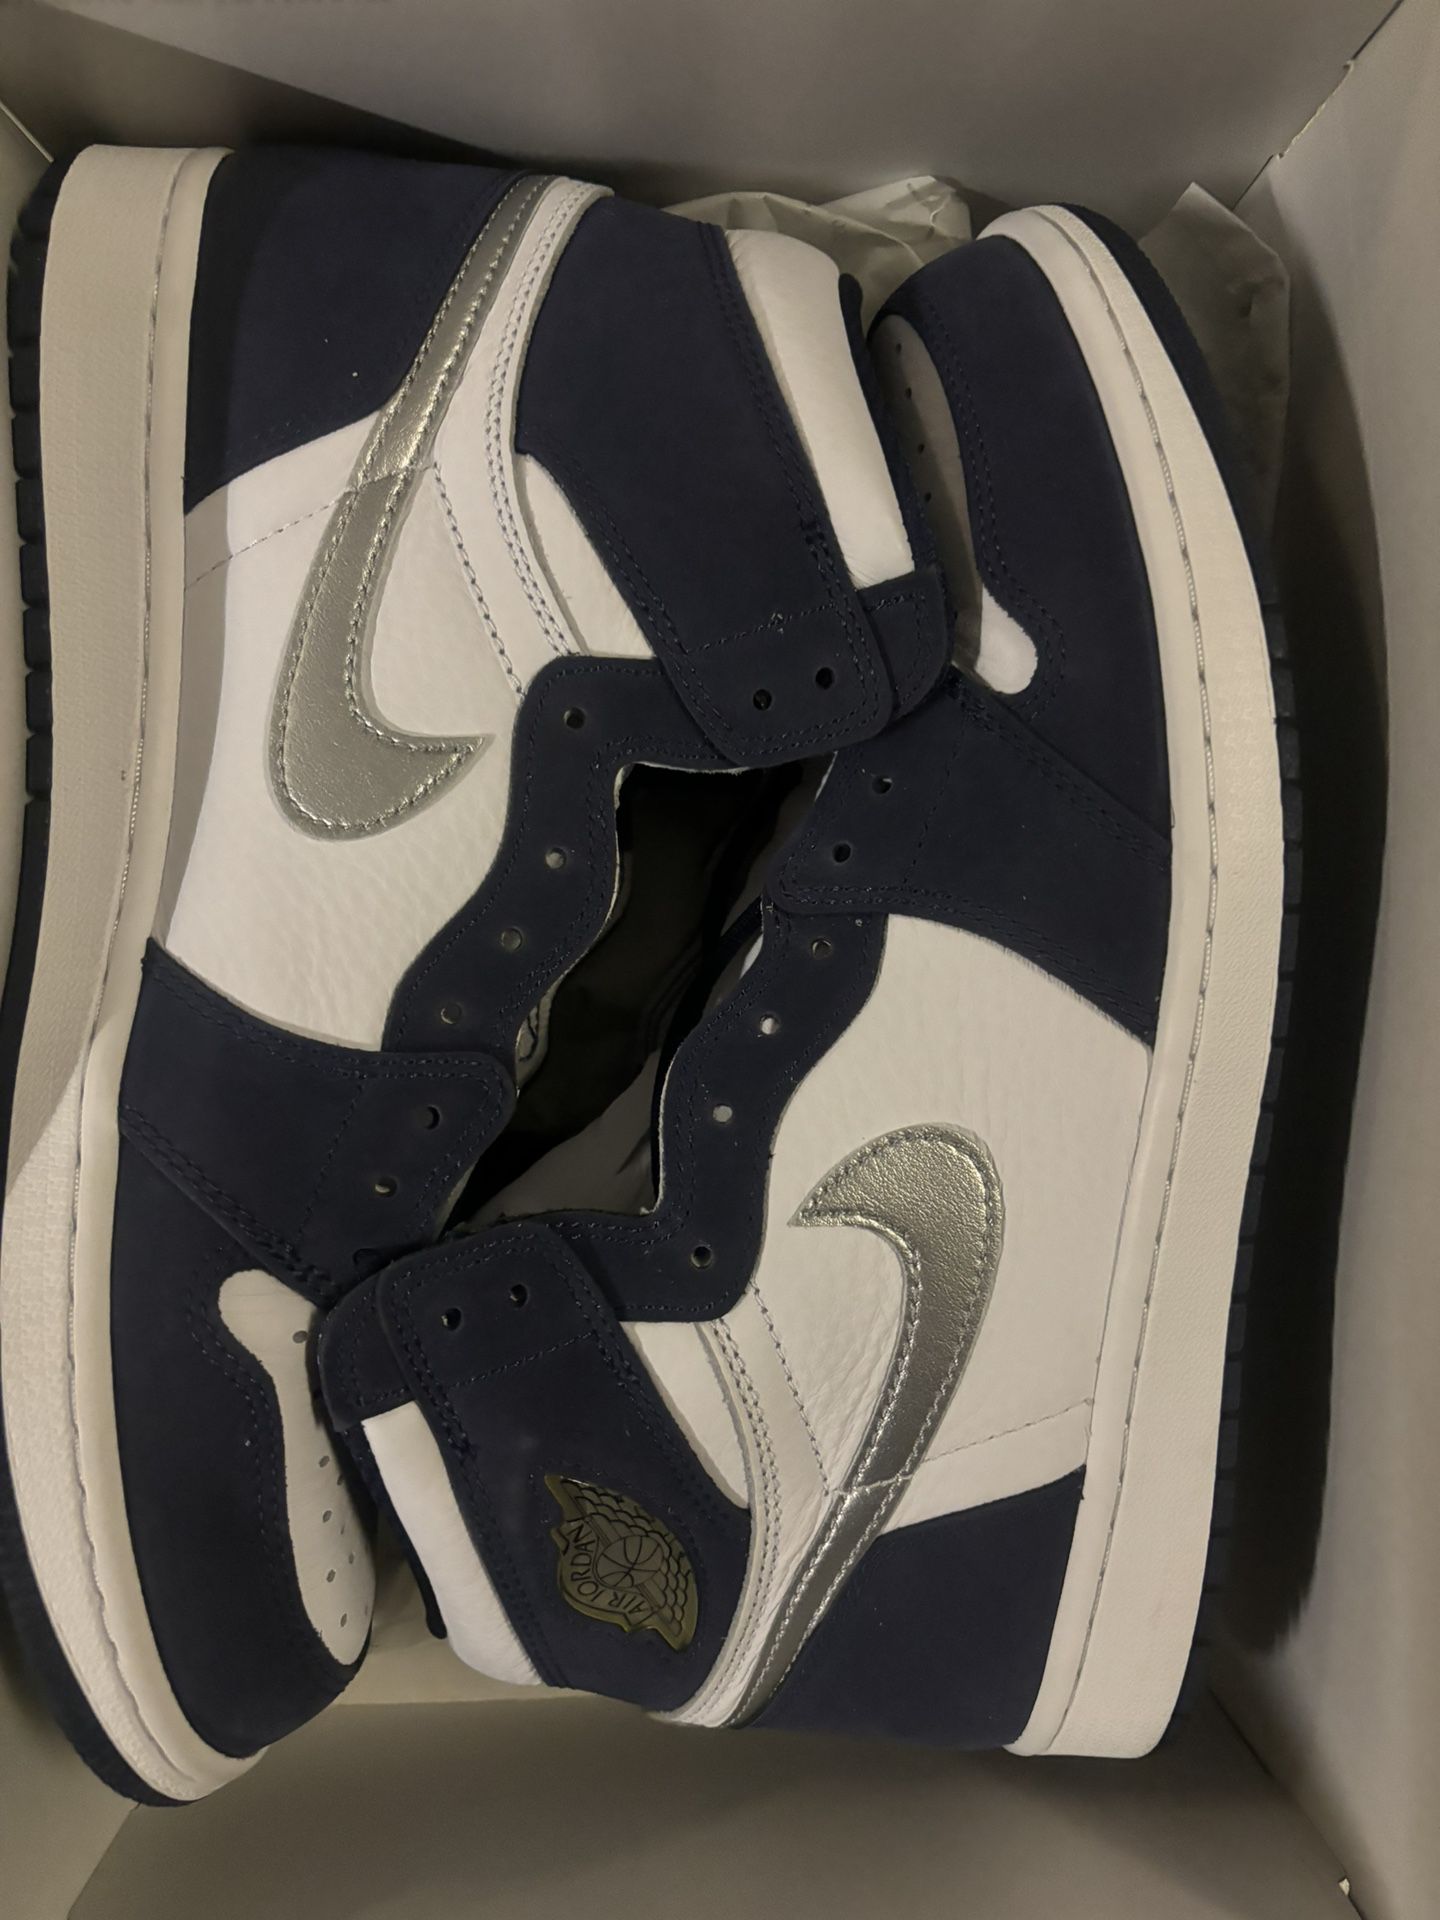 Jordan 1 High Og. Midnight navy CO. Japan. Size(10.5M). Preowned. In excellent condition. Comes with Og all. $125. Cash. Trades Always welcome. Tap in